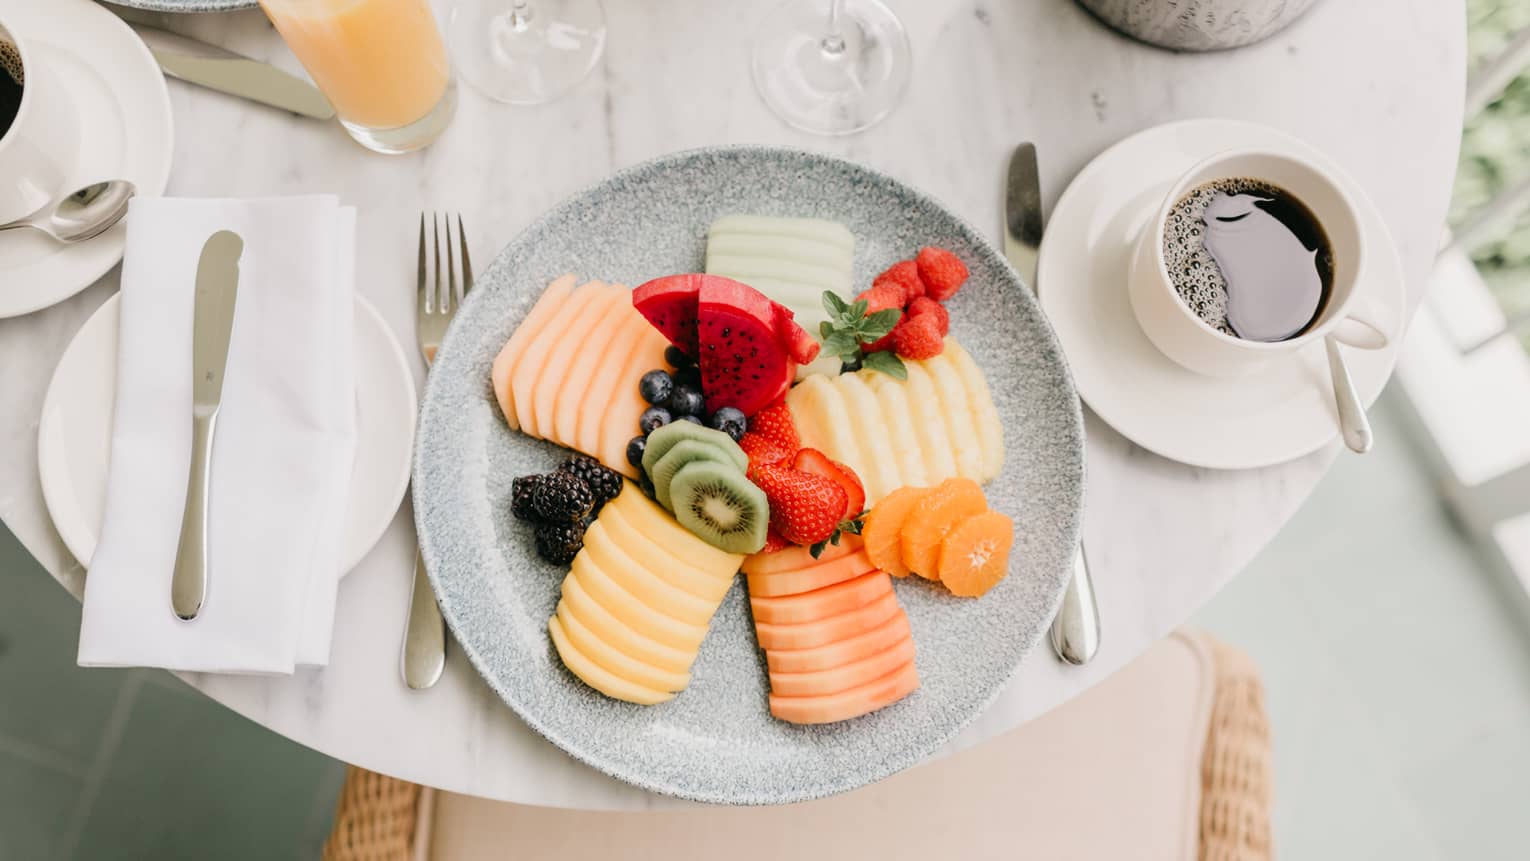 Plate of assorted sliced fruits and whole berries, place setting, coffee